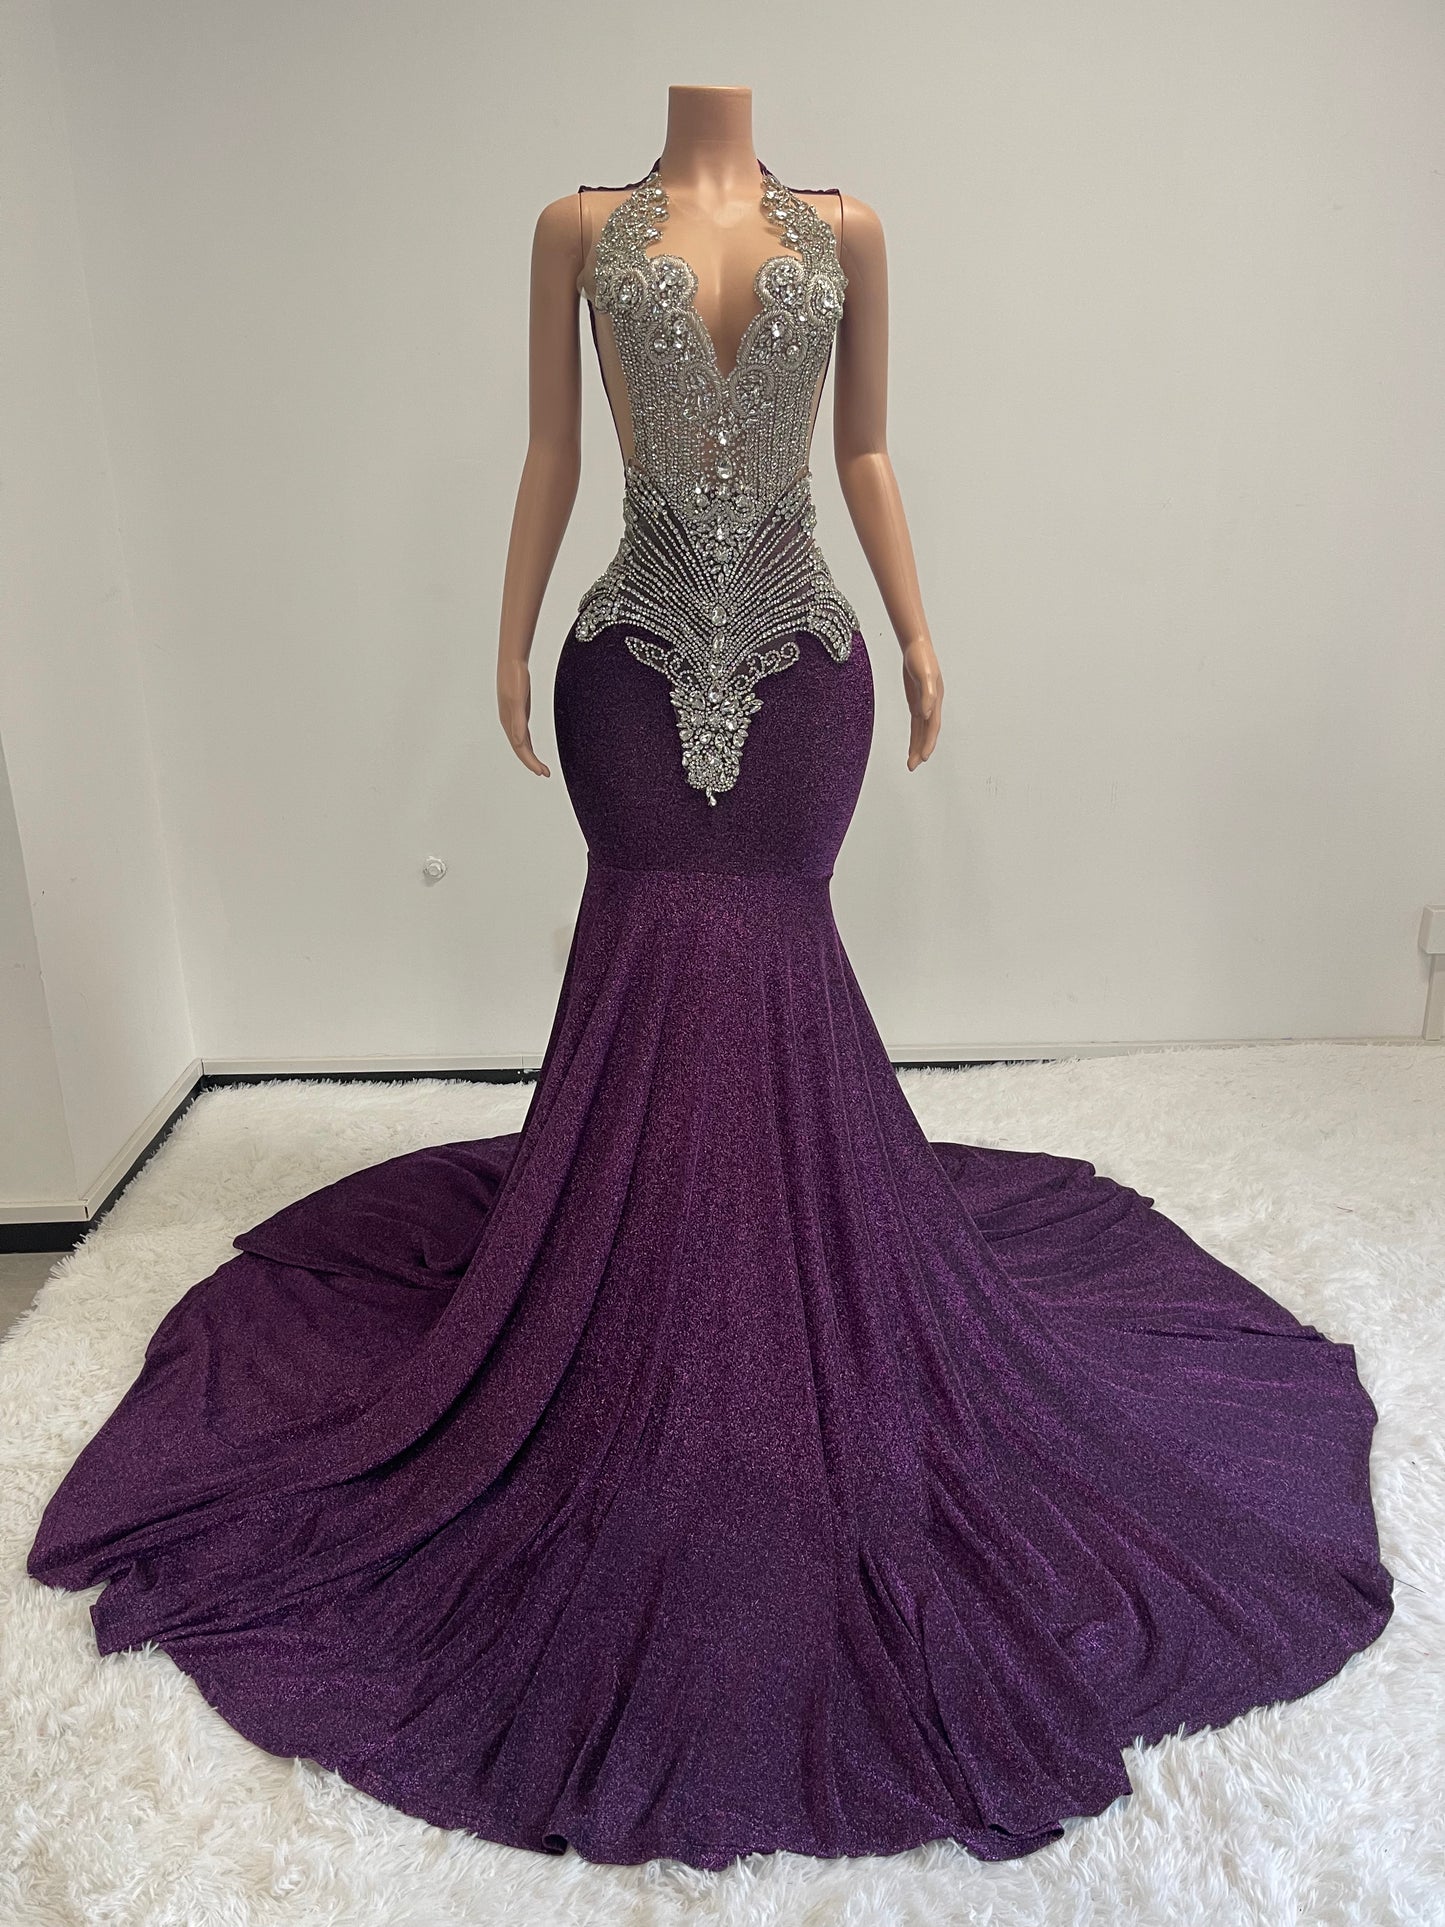 “Onyx” Gown